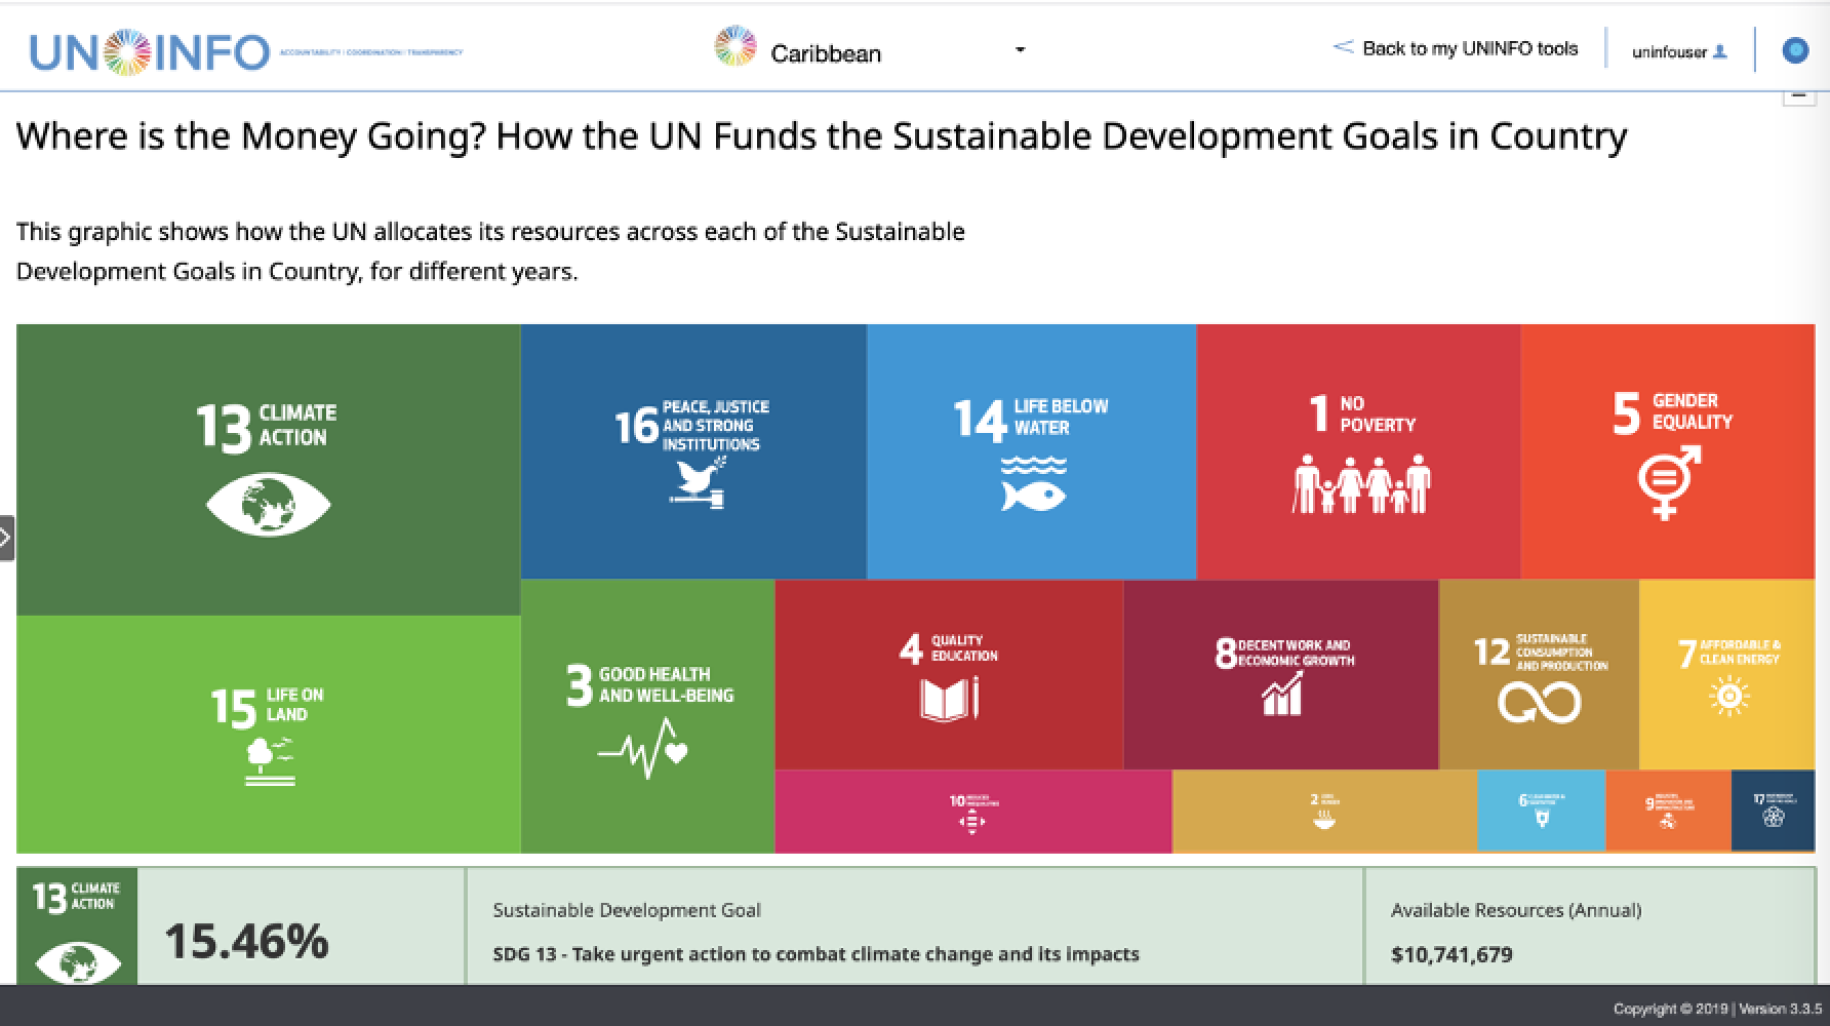 A screenshot of the UNINFO tree map showing the investments in SDGs for the Caribbean.